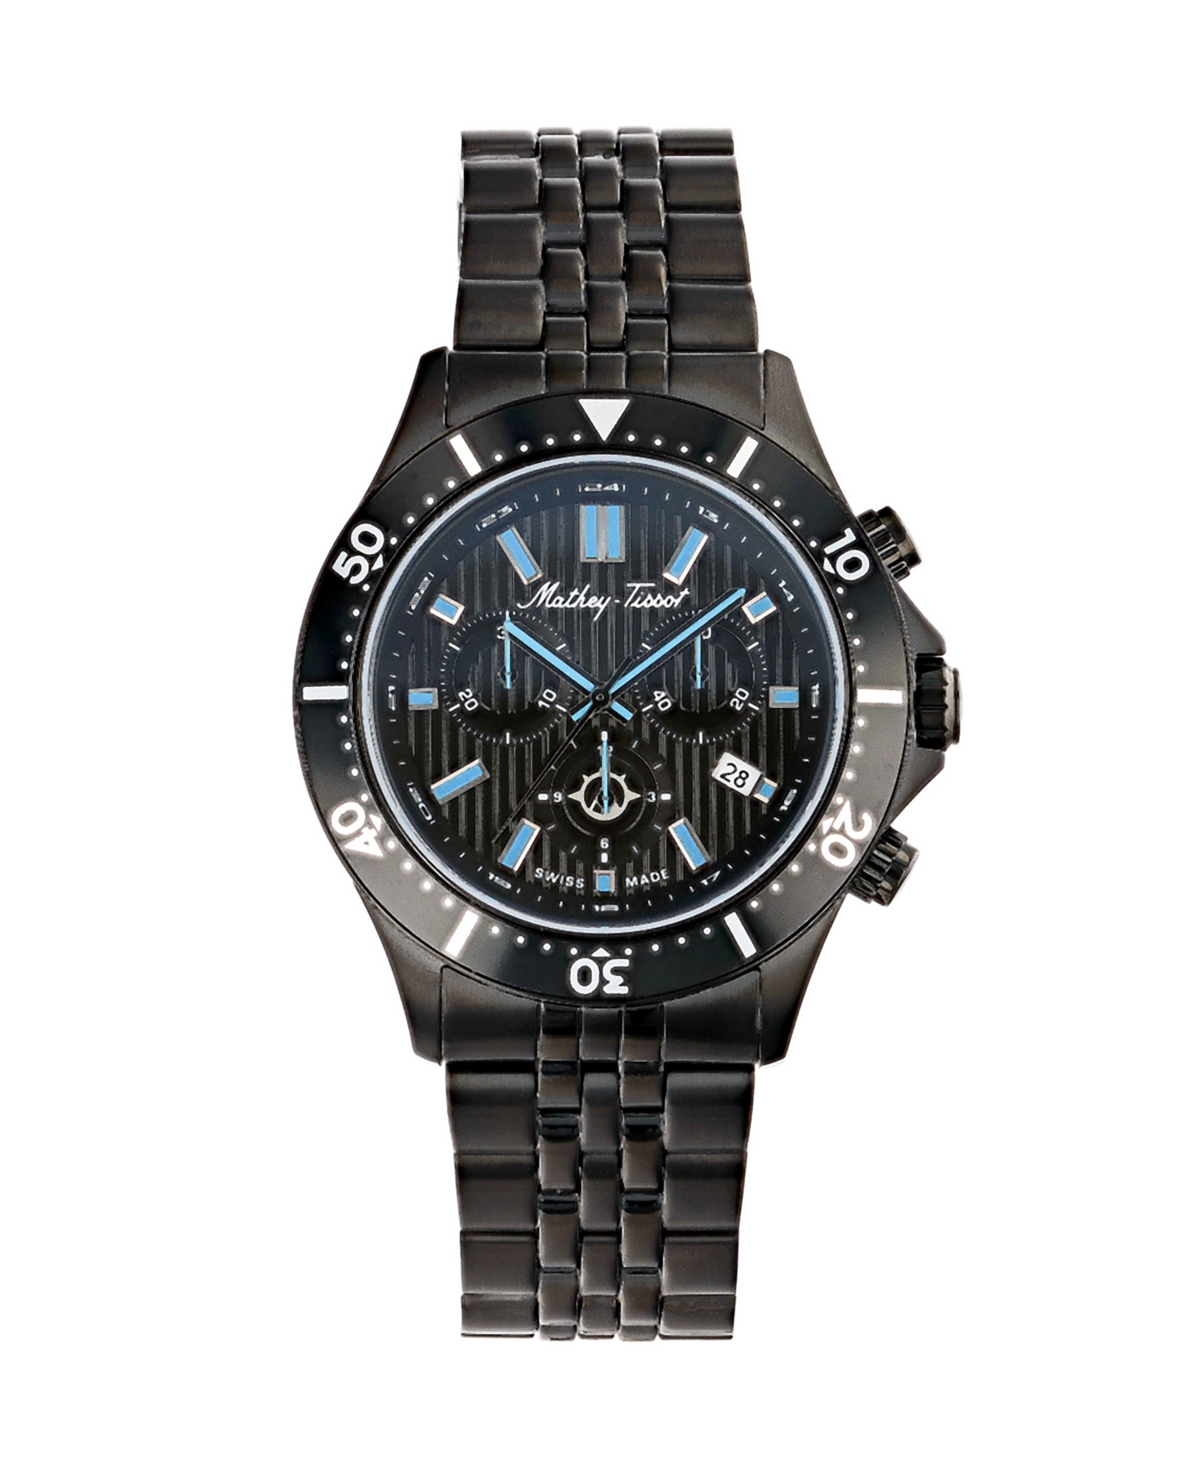 Mathey-Tissot Men's Expedition Chronograph Collection Black Stainless Steel Bracelet Watch, 43mm